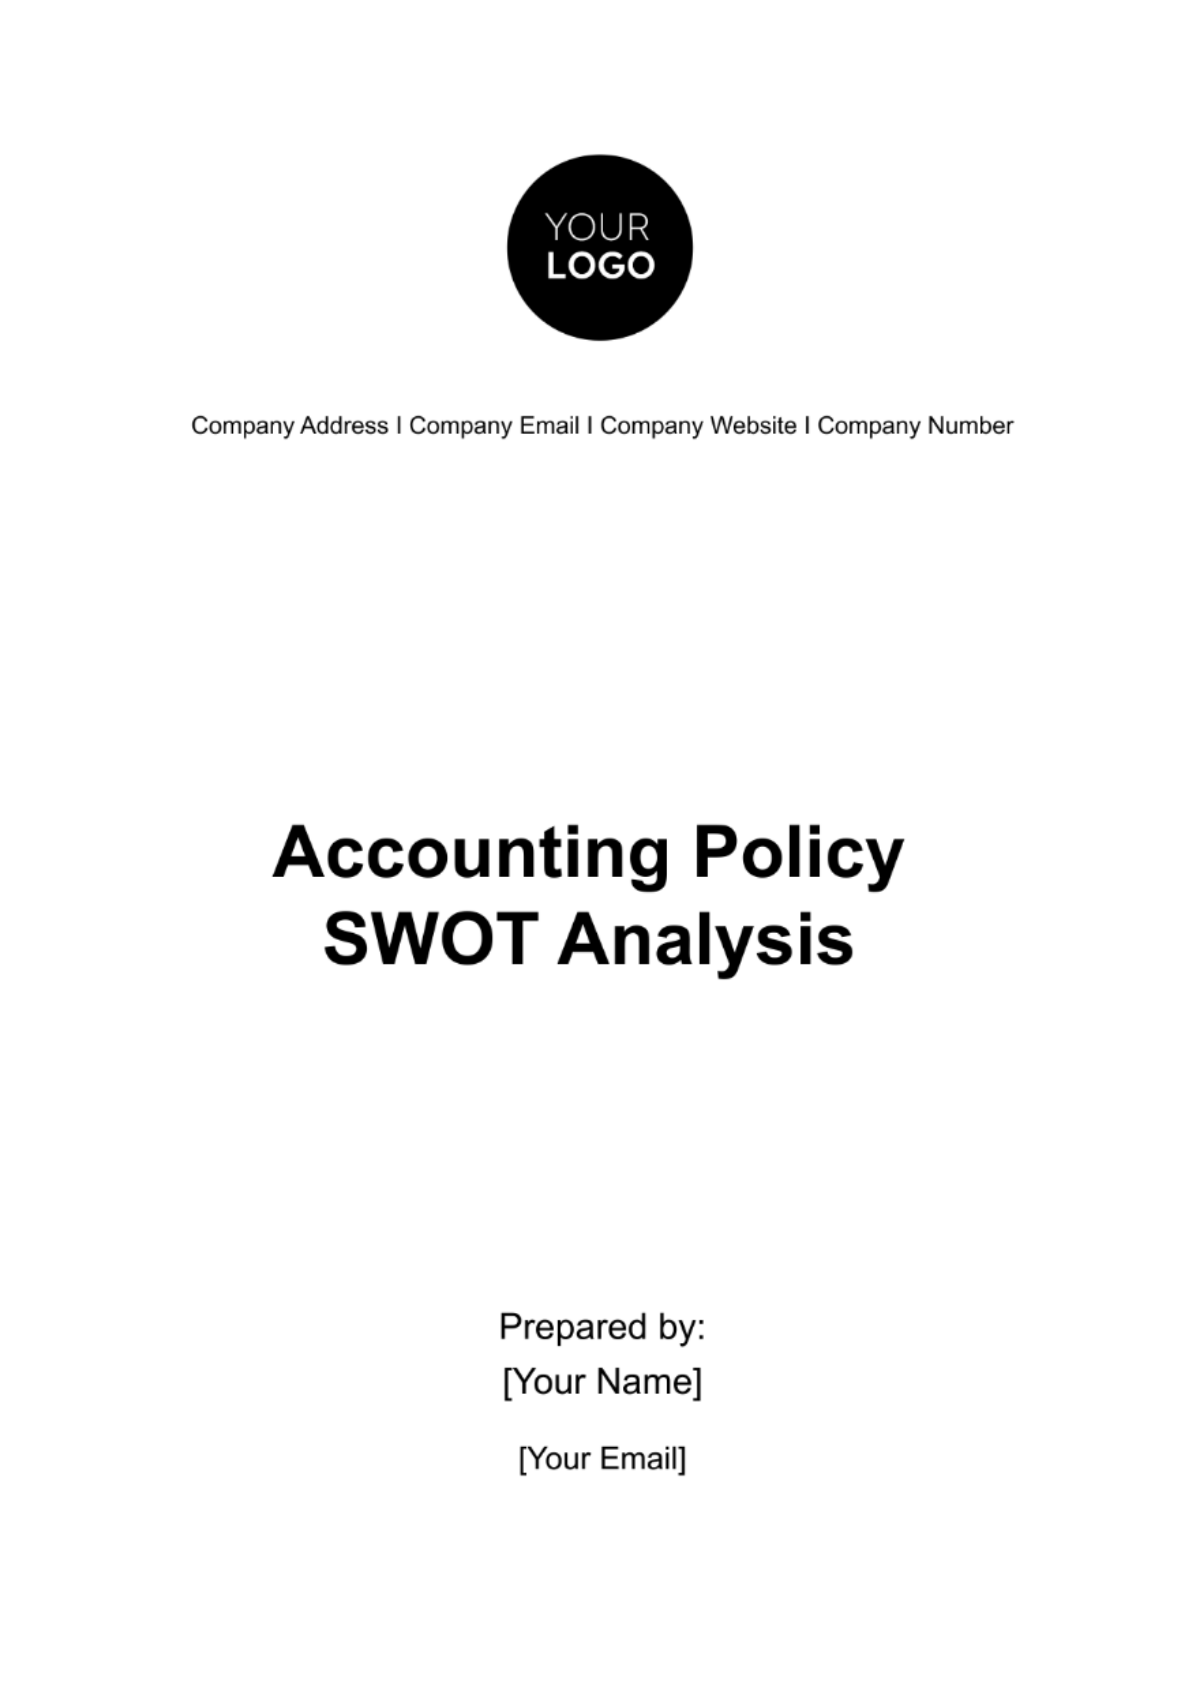 Accounting Policy SWOT Analysis Template